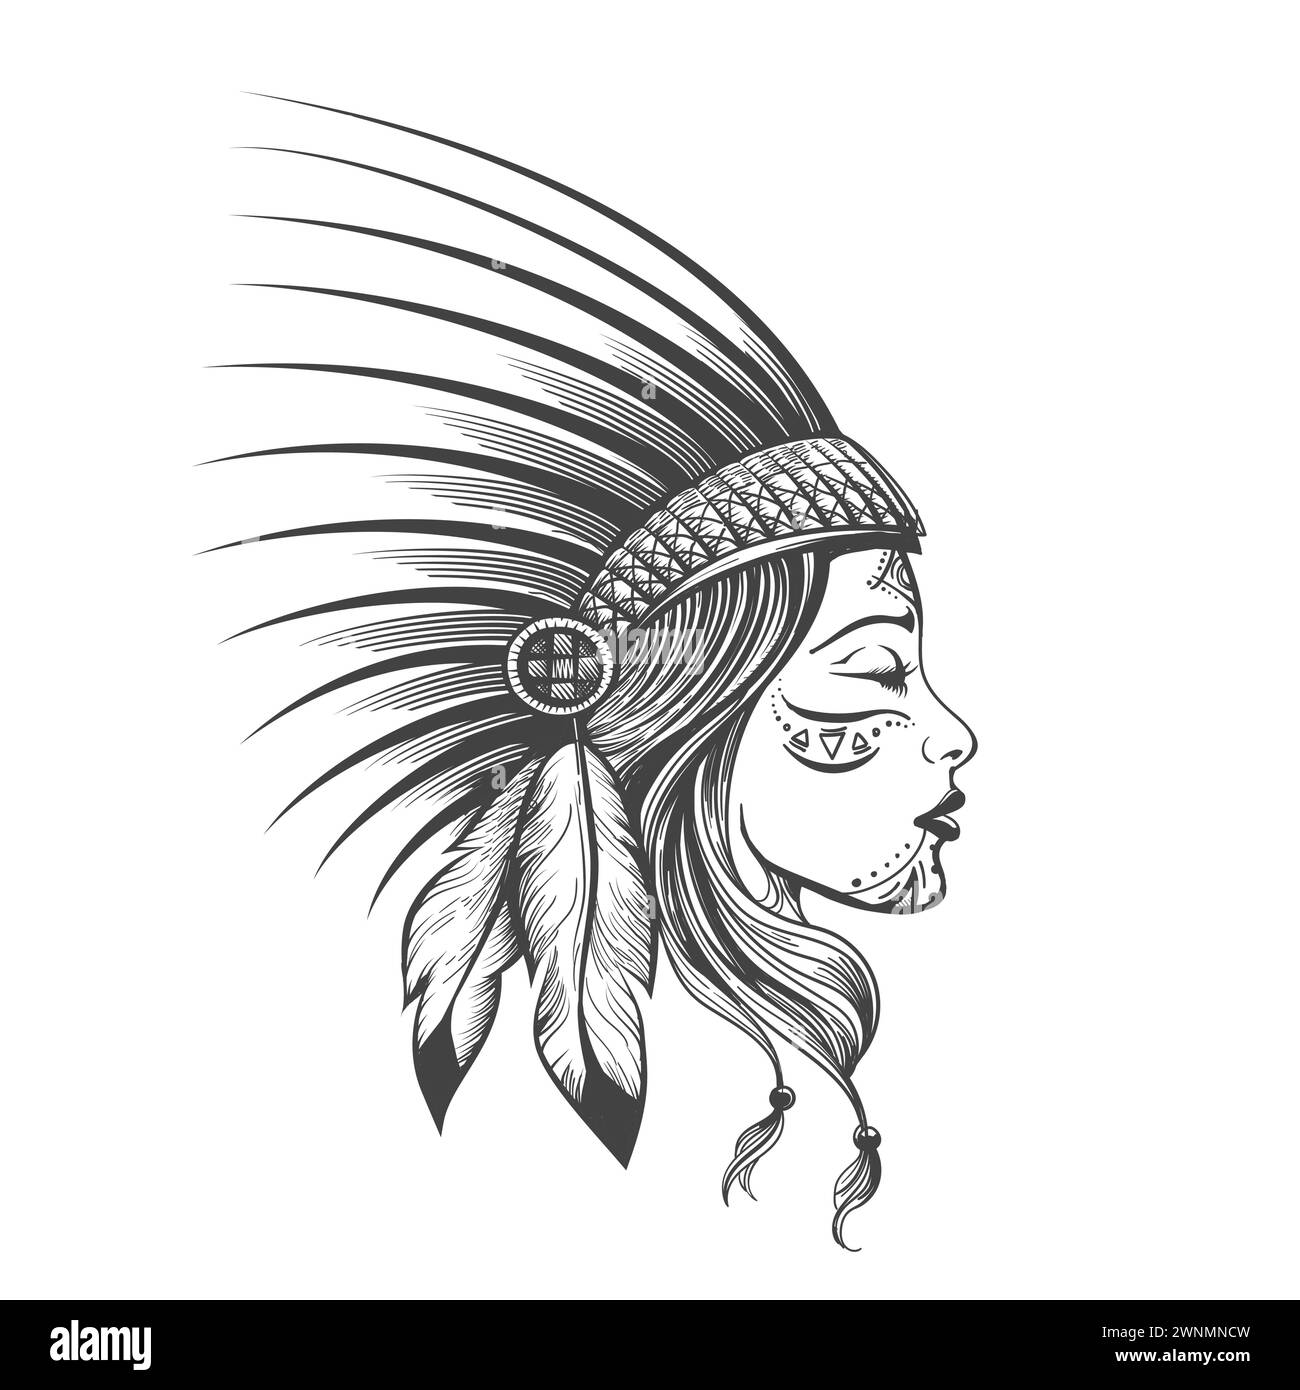 Hand drawn indian girl in feathers war bonnet and warrior makeup isolated on white Vector illustration.No AI was used. Stock Vector